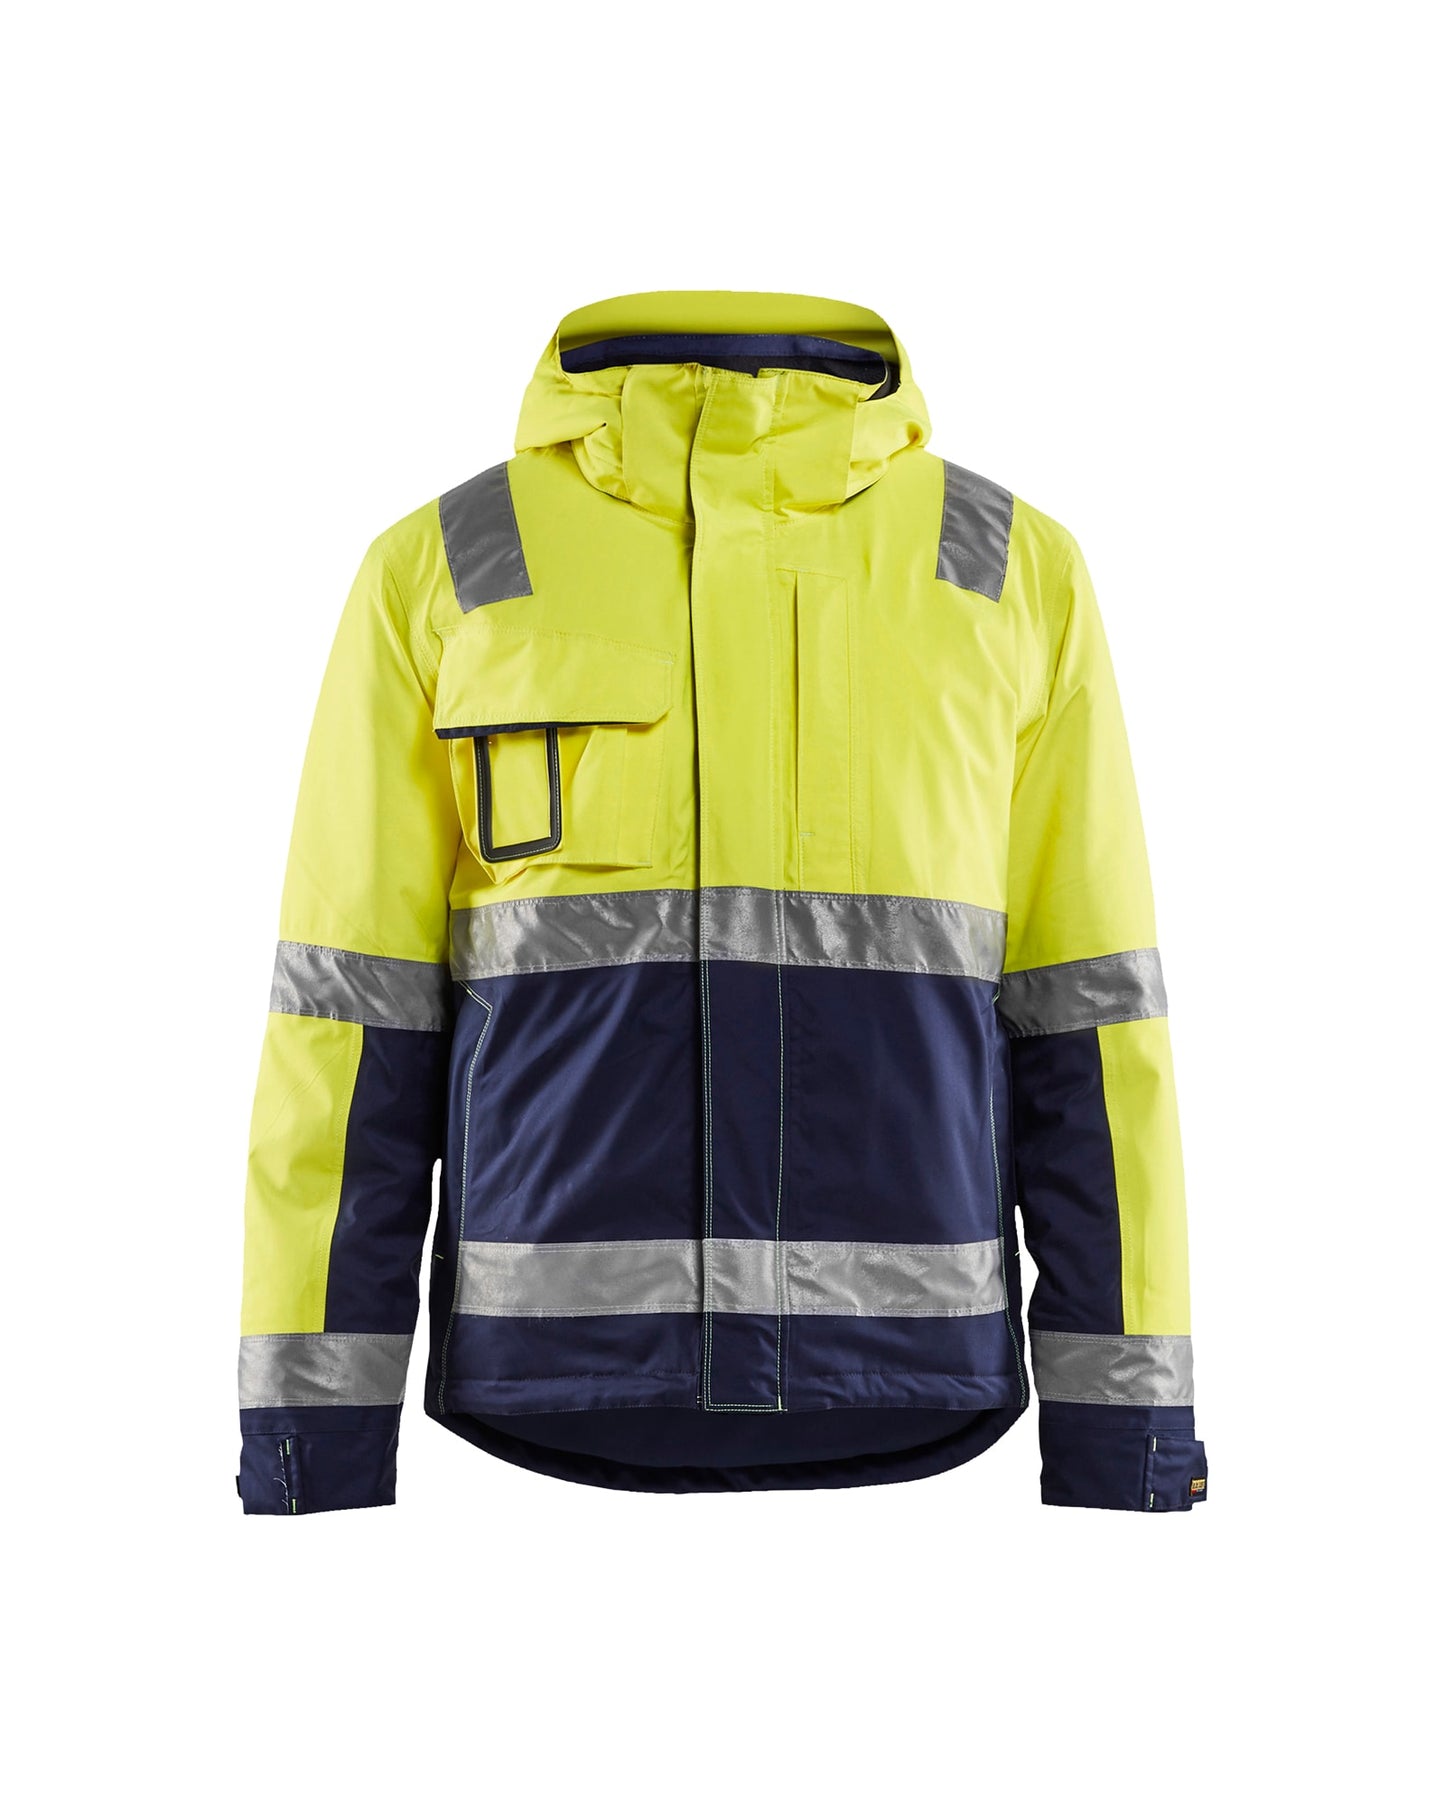 New winter jackets from Snickers Workwear - PHPI Online